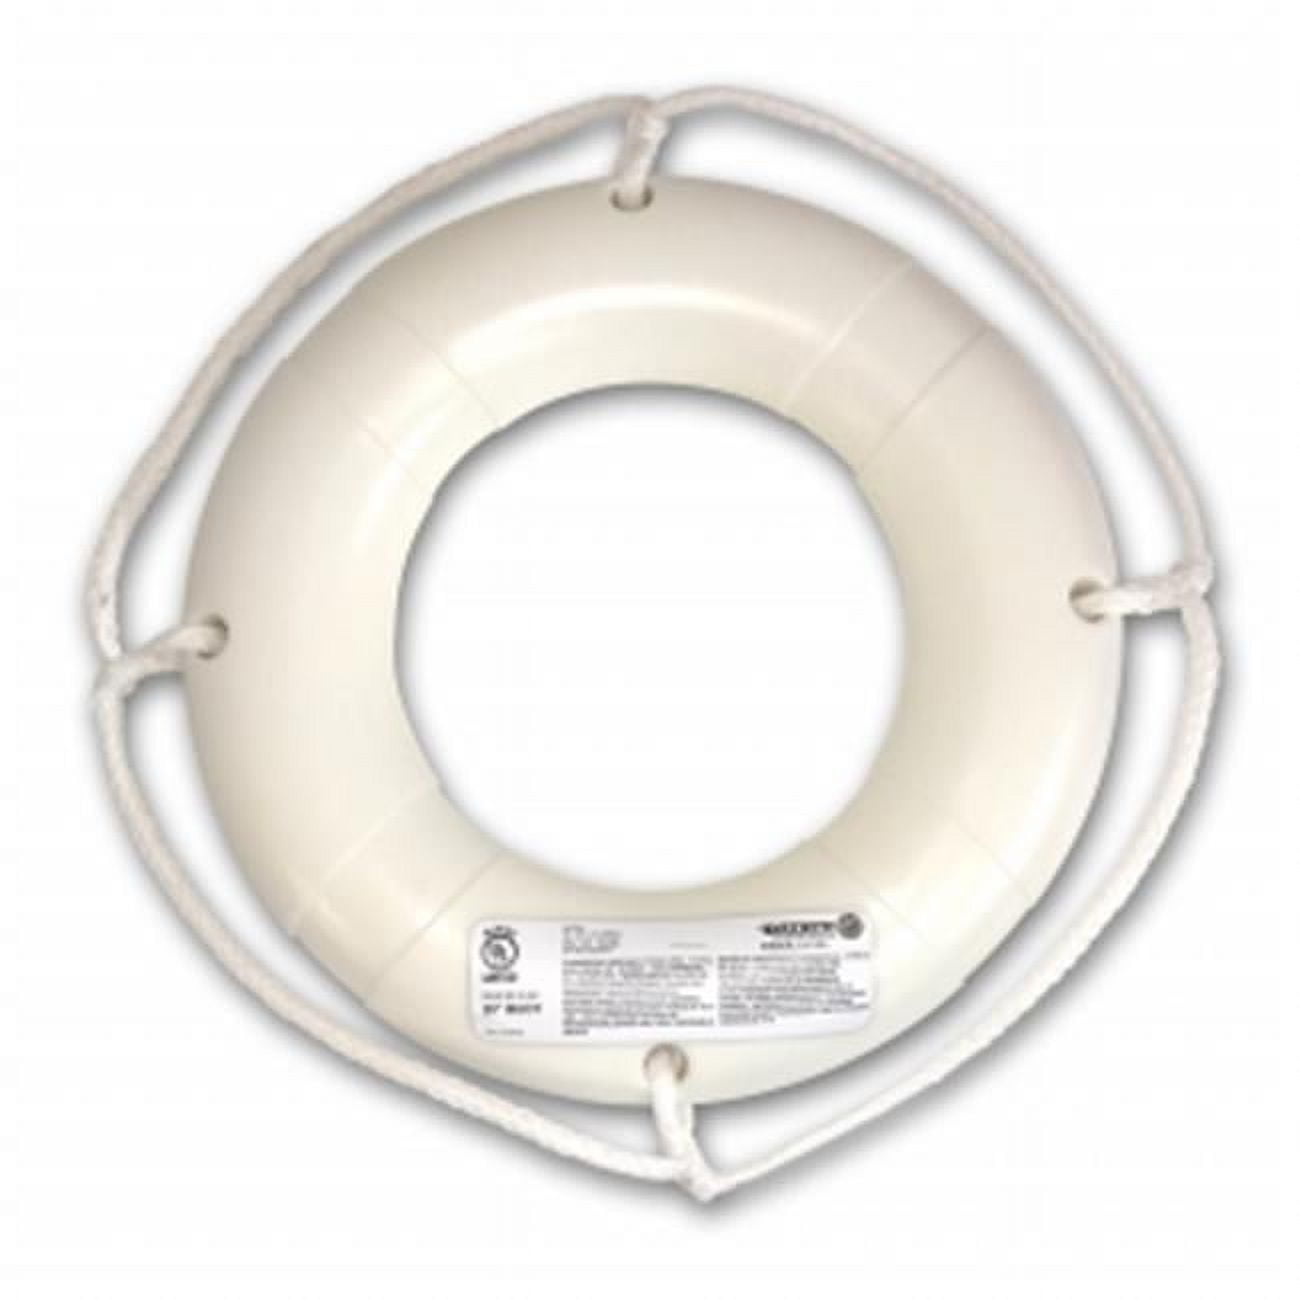 Picture of Datrex DX0200WD 20 in. No Tape Lifering, White - USCG